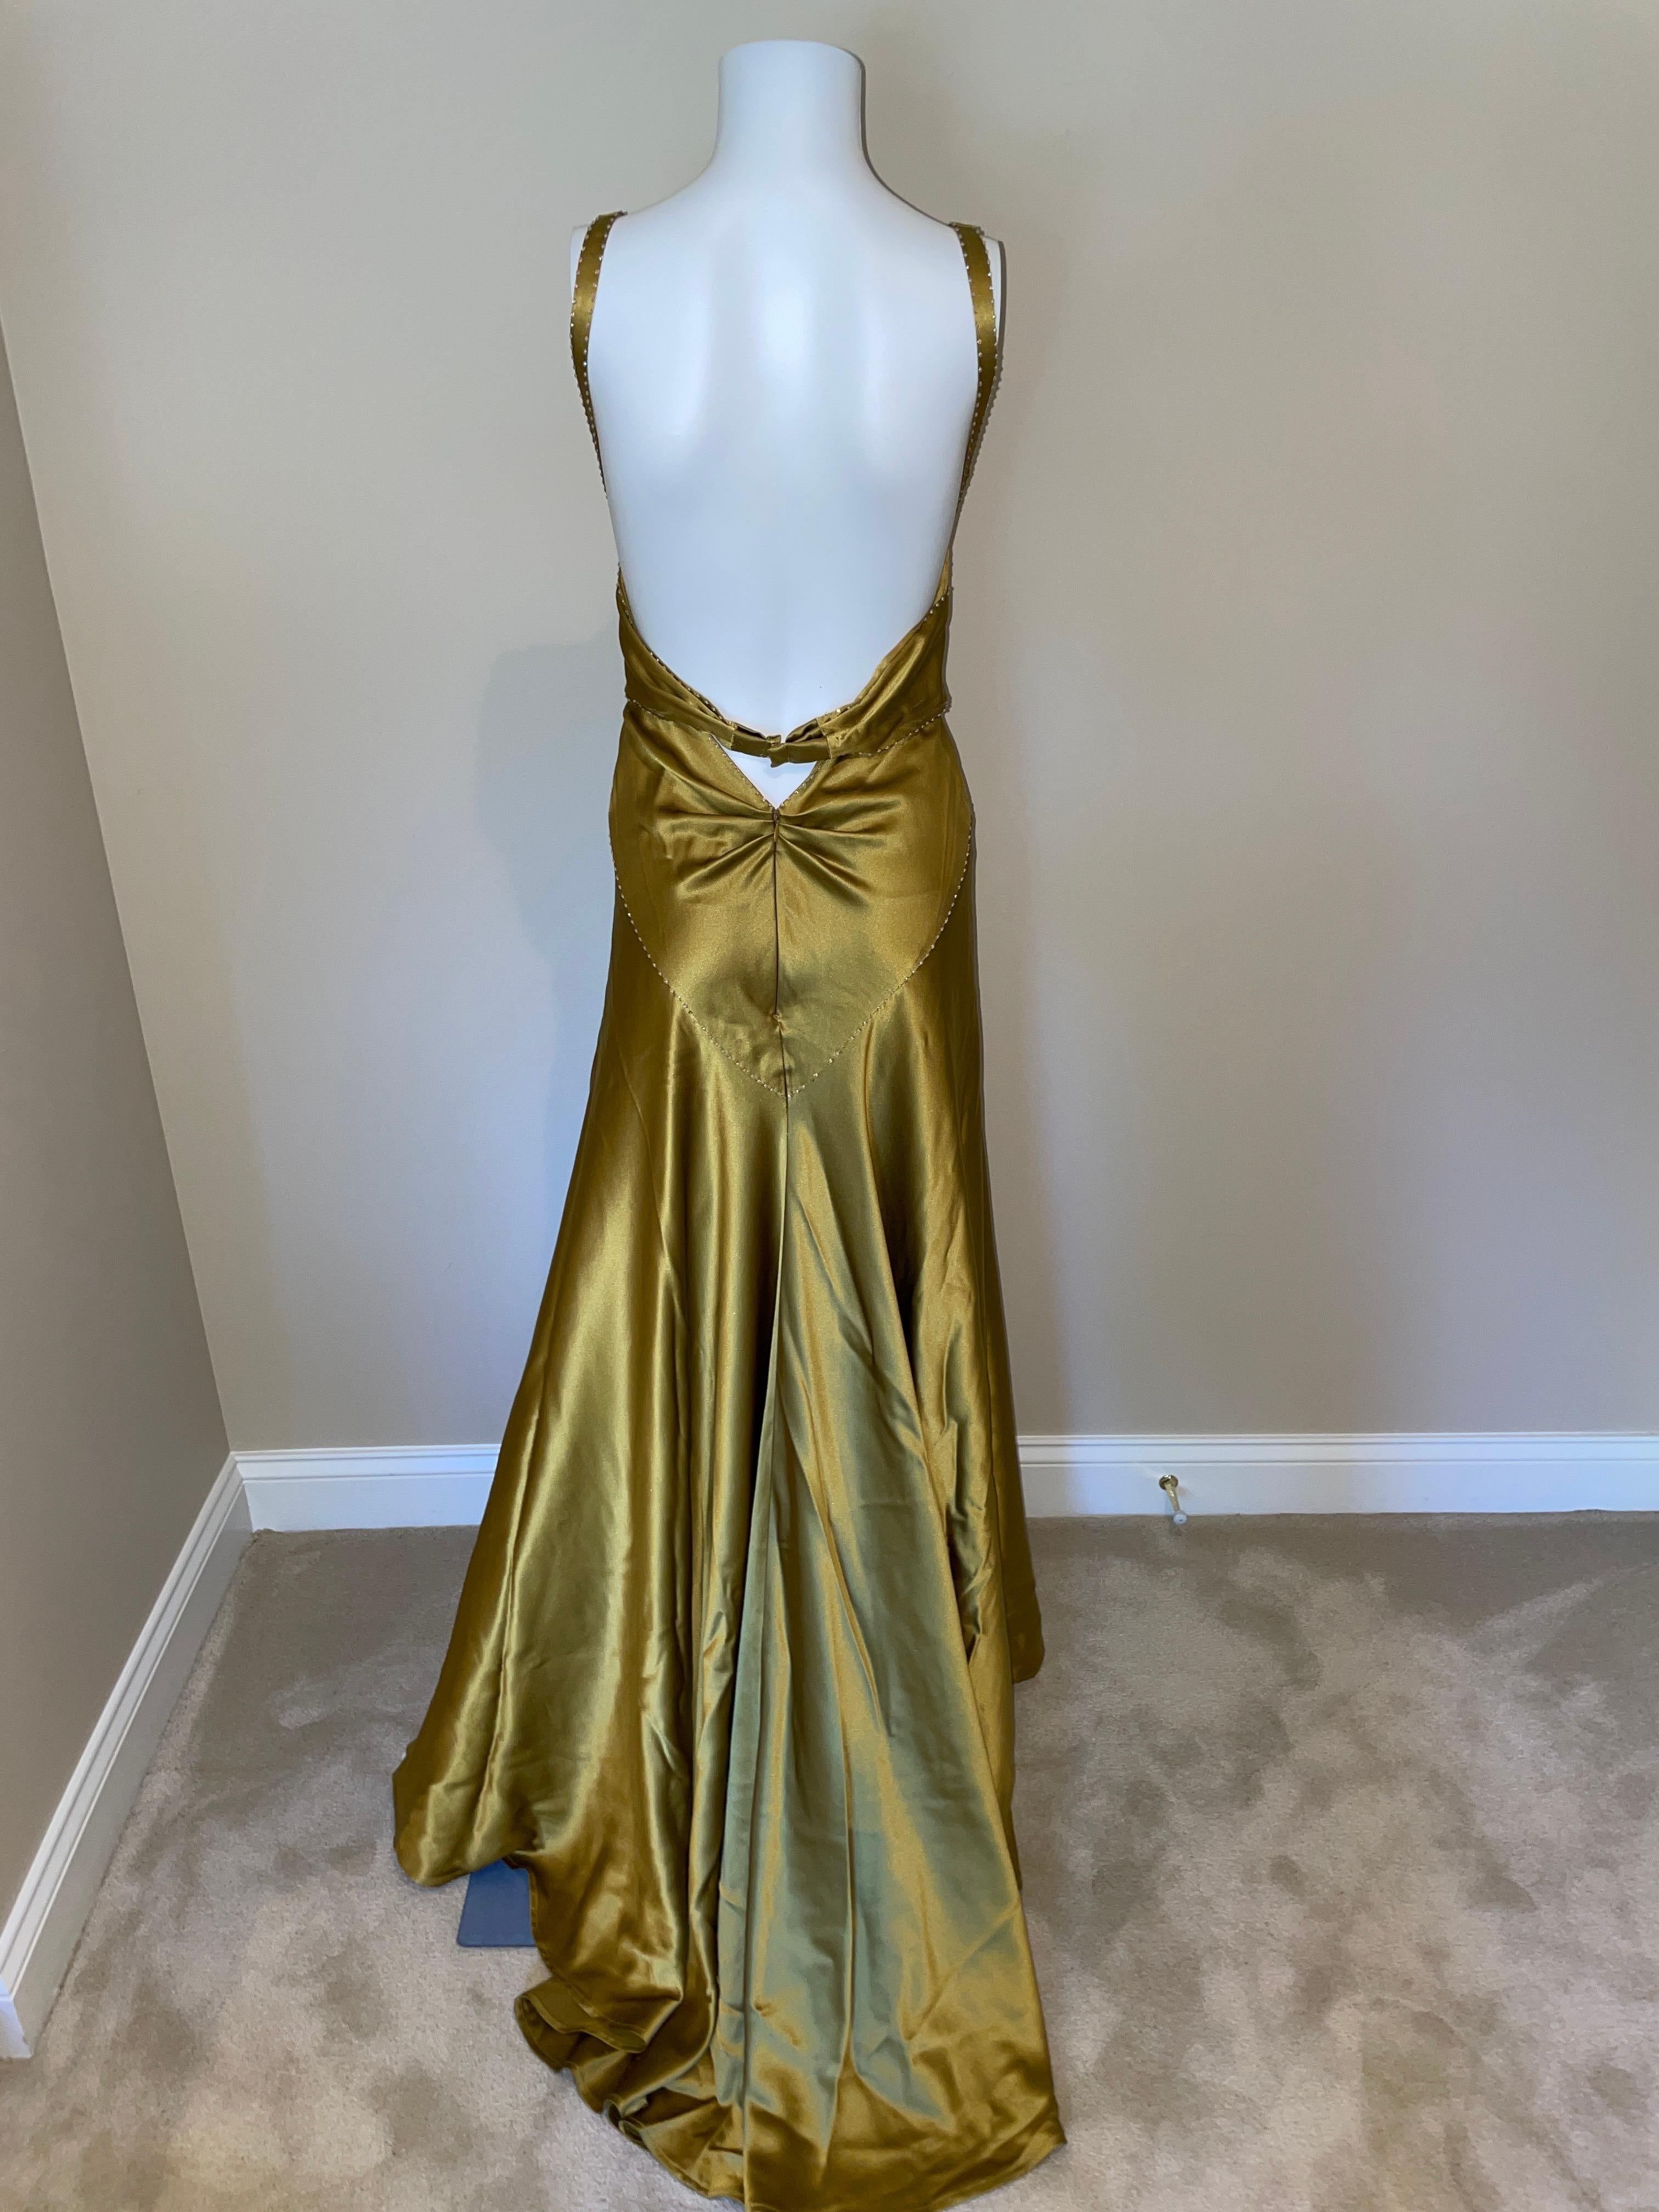 NO TAGS attributed to Roberto Cavalli. I love this maxi dress with train but it’s missing all of its tags. I think it’s silk and I think it will fit a size S/M. There are tiny flaws so if you are picky please do not purchase this gown! The color is